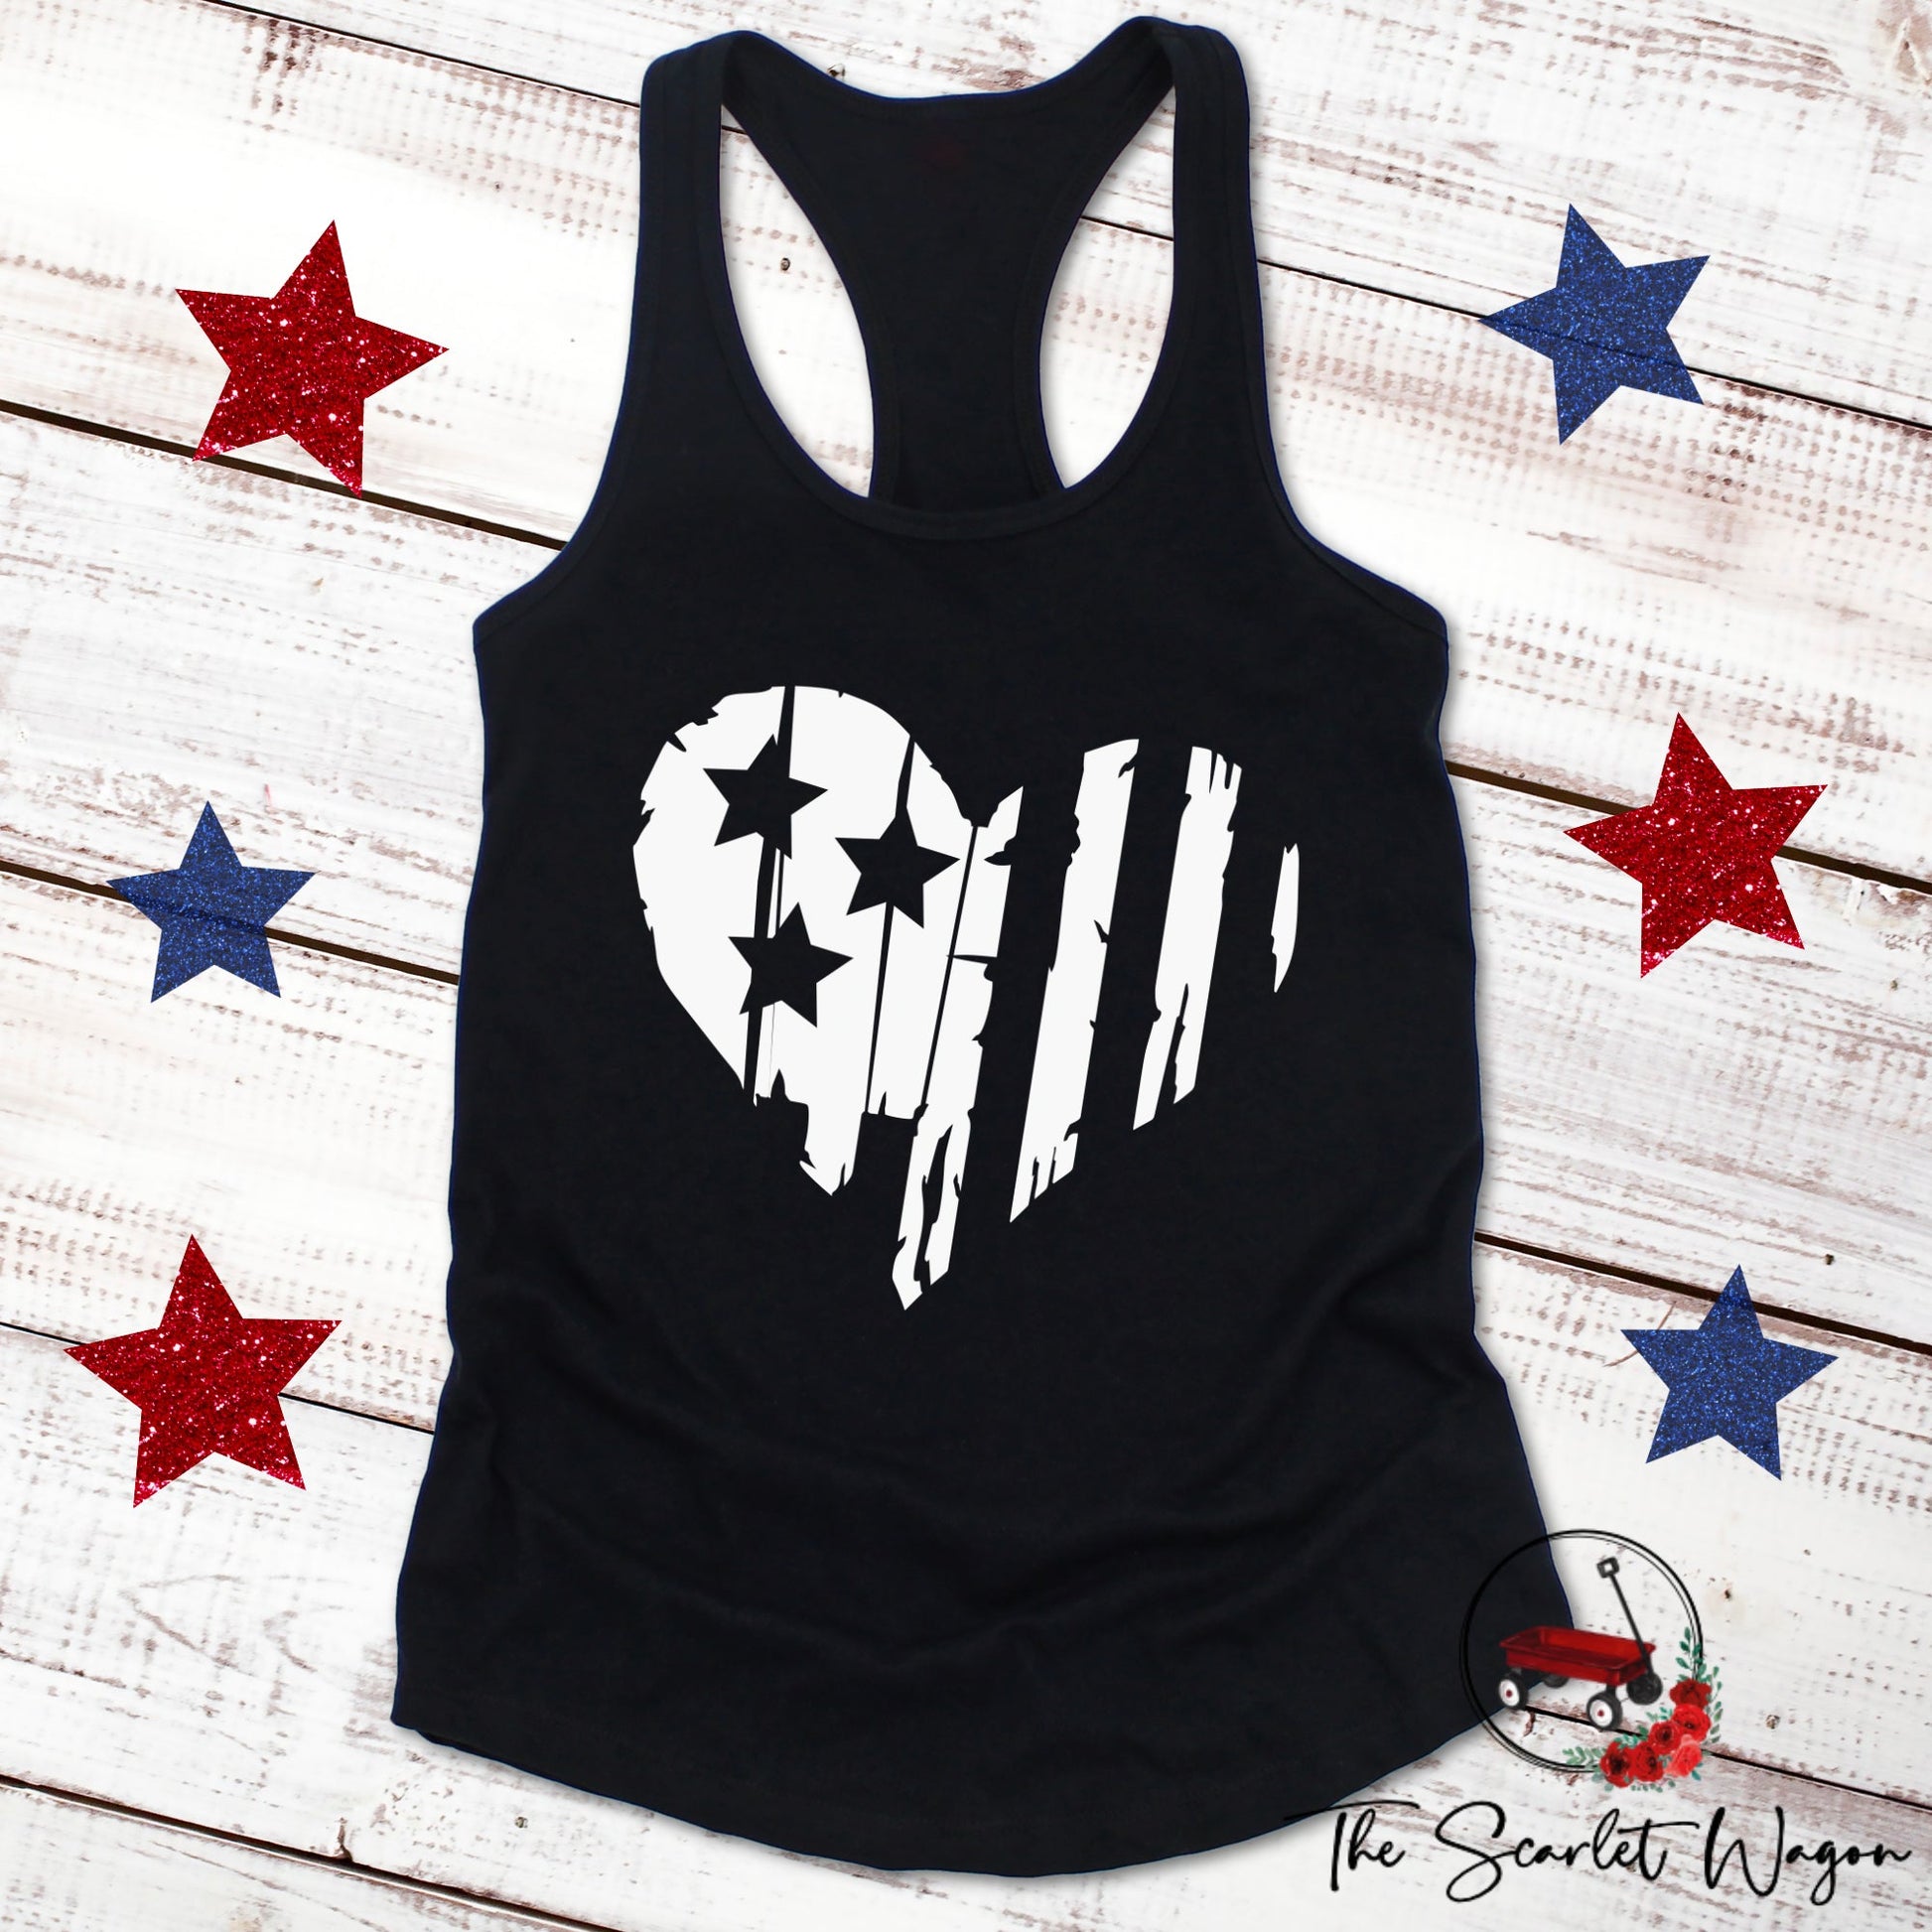 Distressed Heart-Shaped Flag Women's Racerback Tank Patriotic Shirt The Scarlet Wagon Boutique Black Small 